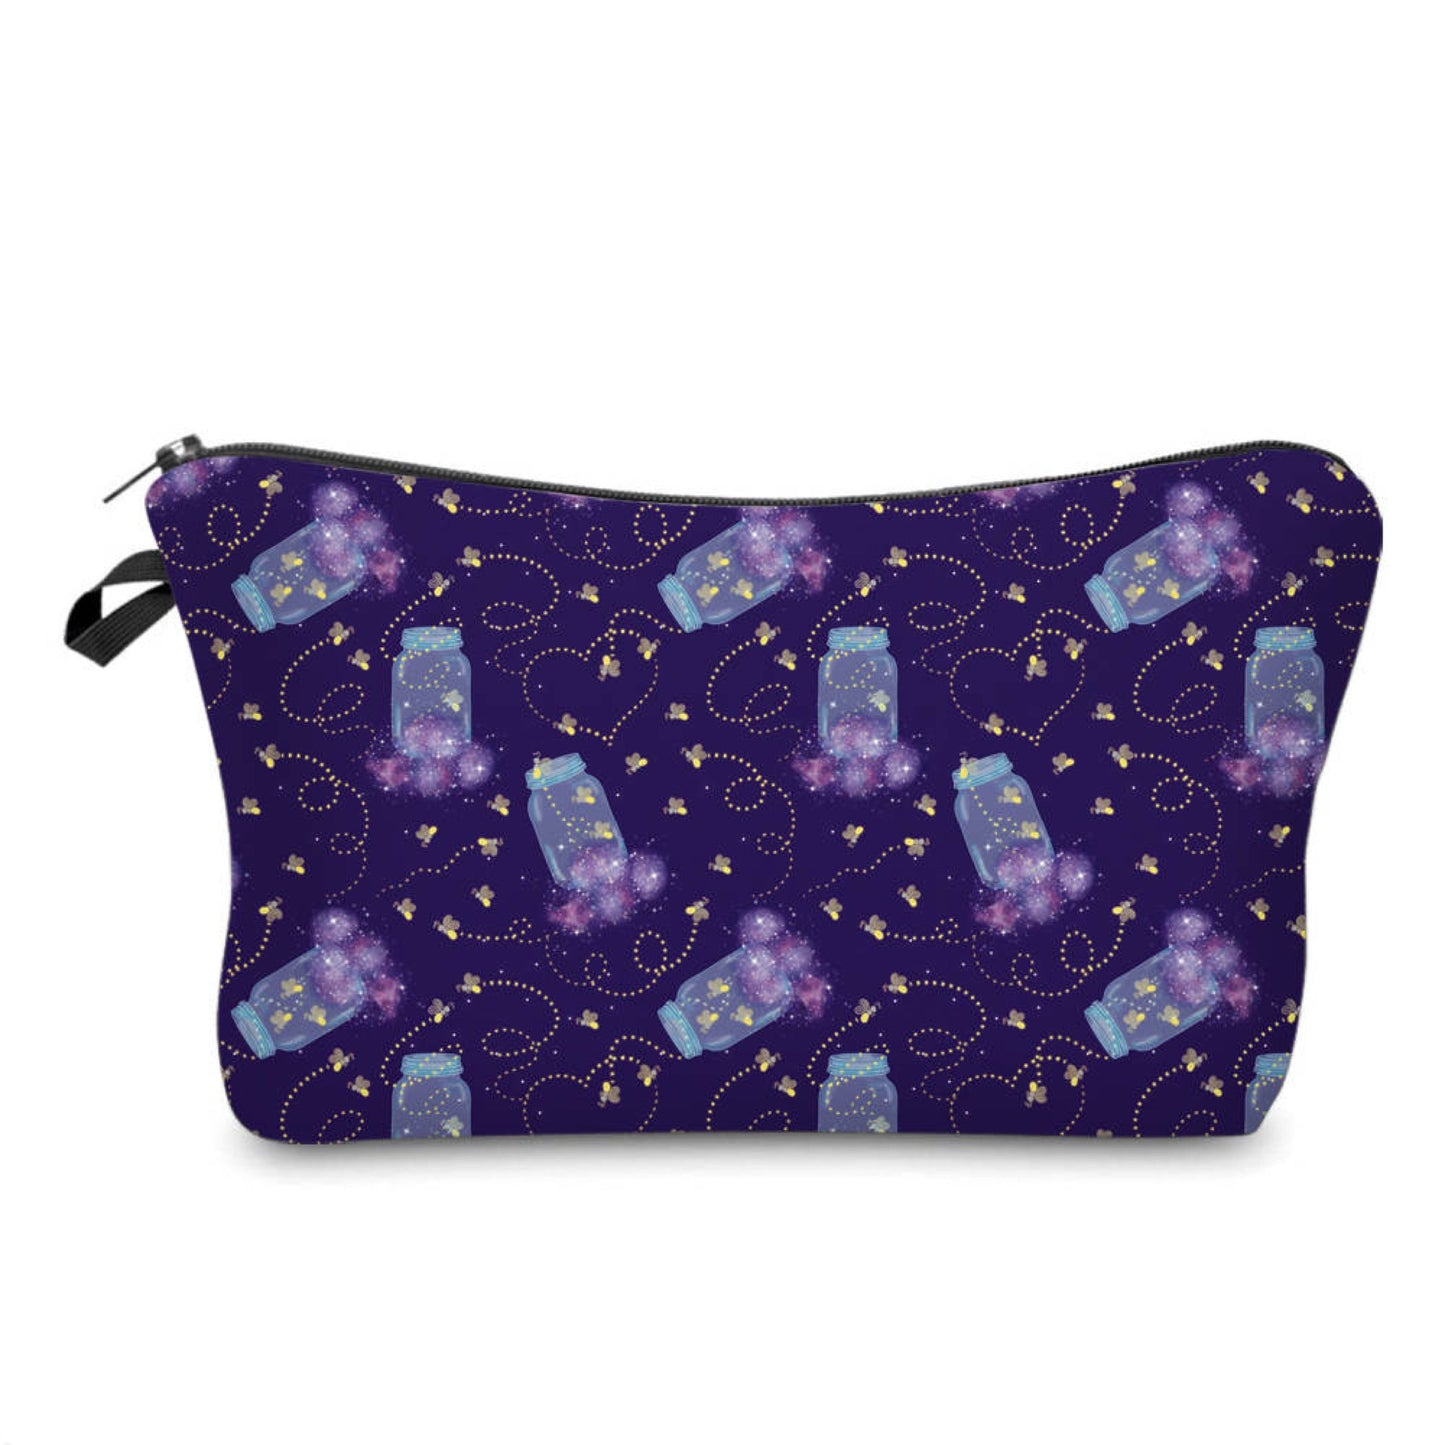 Firefly Purple - Water-Resistant Multi-Use Pouch